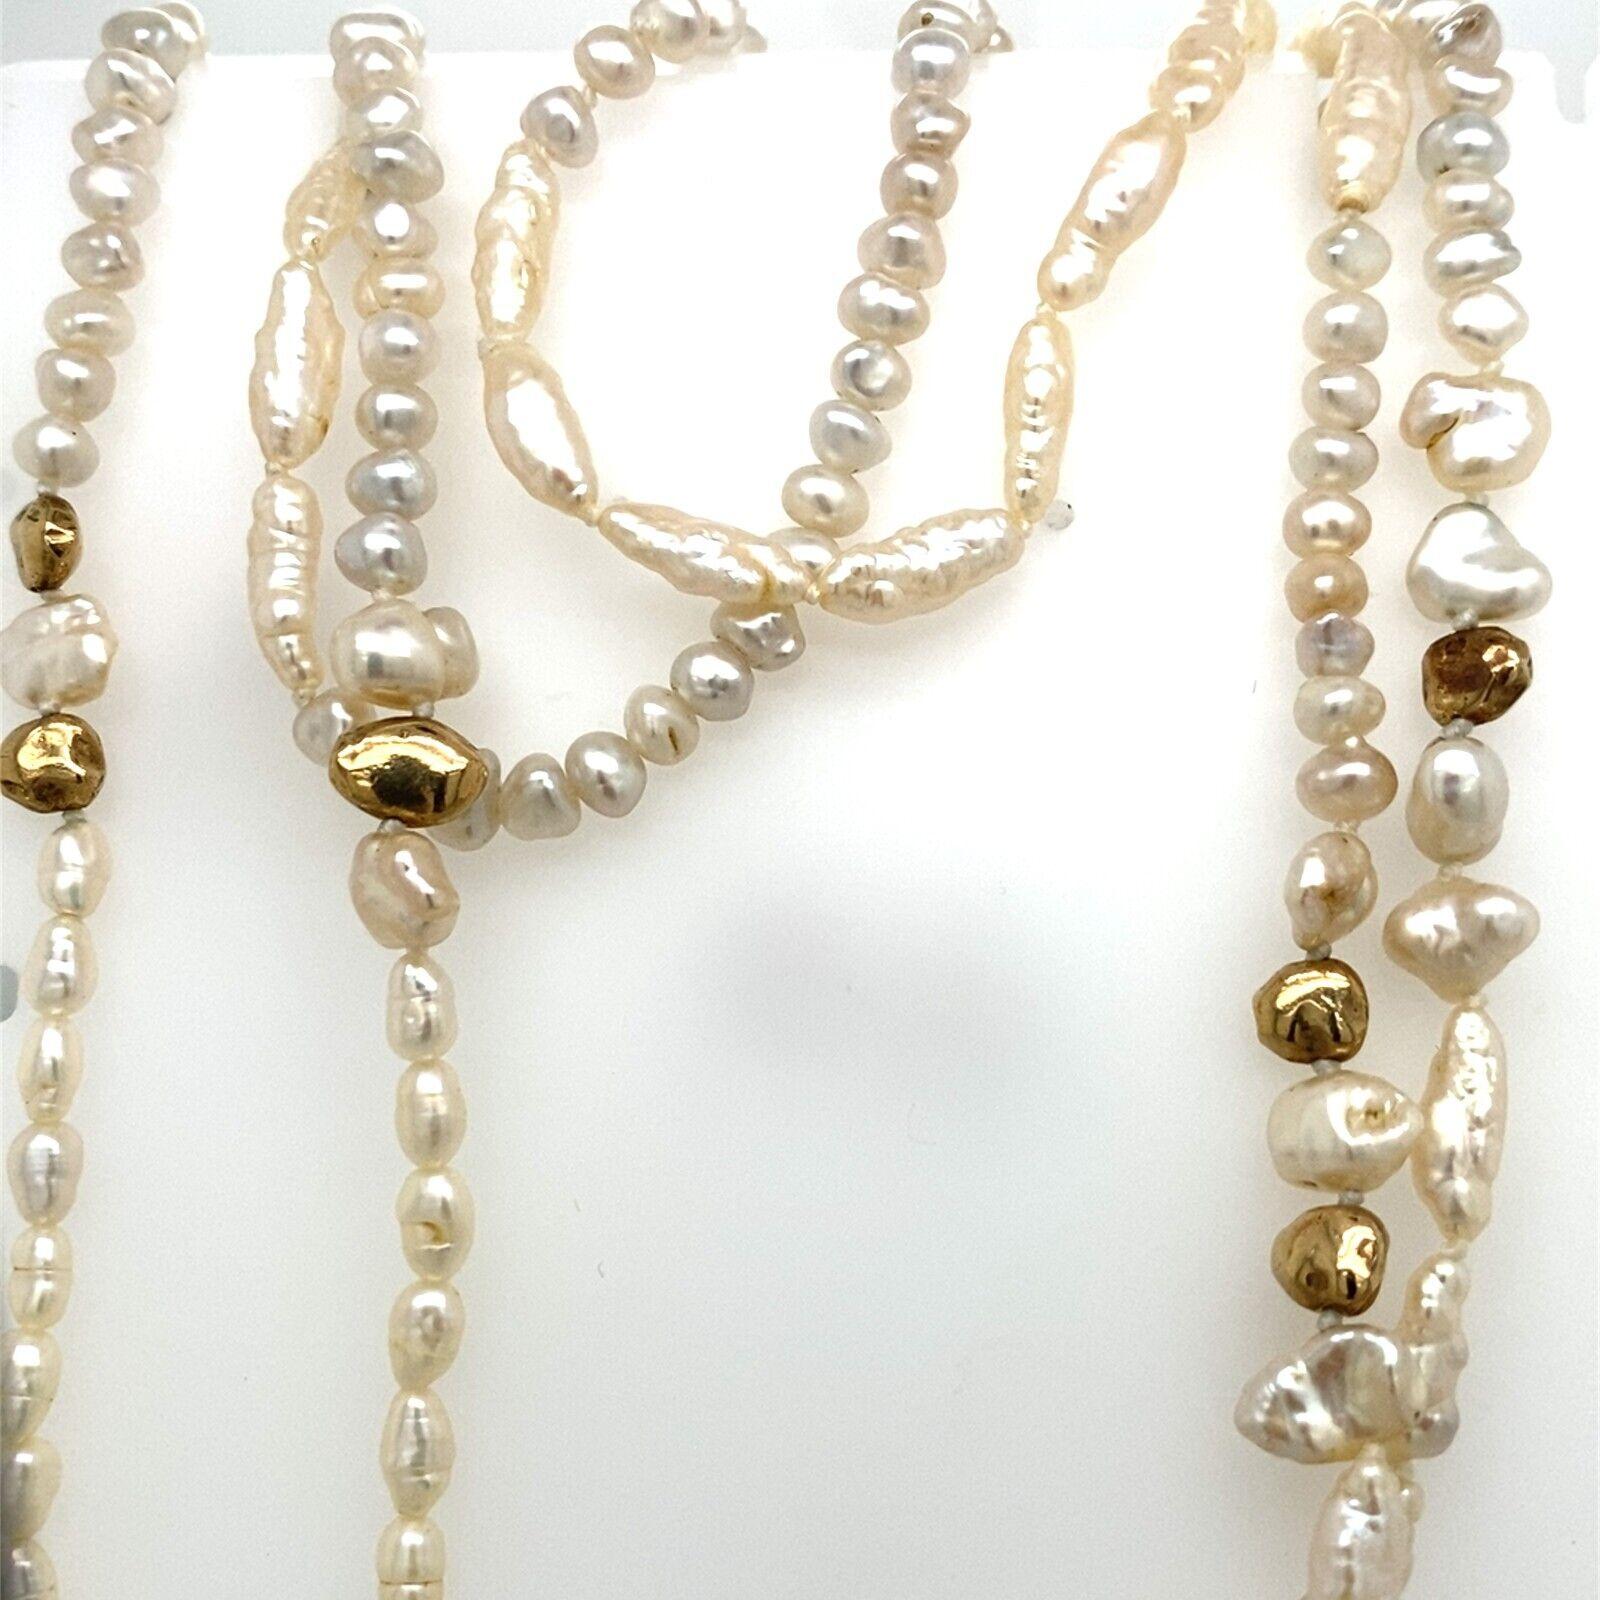 This necklace is all about the pearls. It's a 58